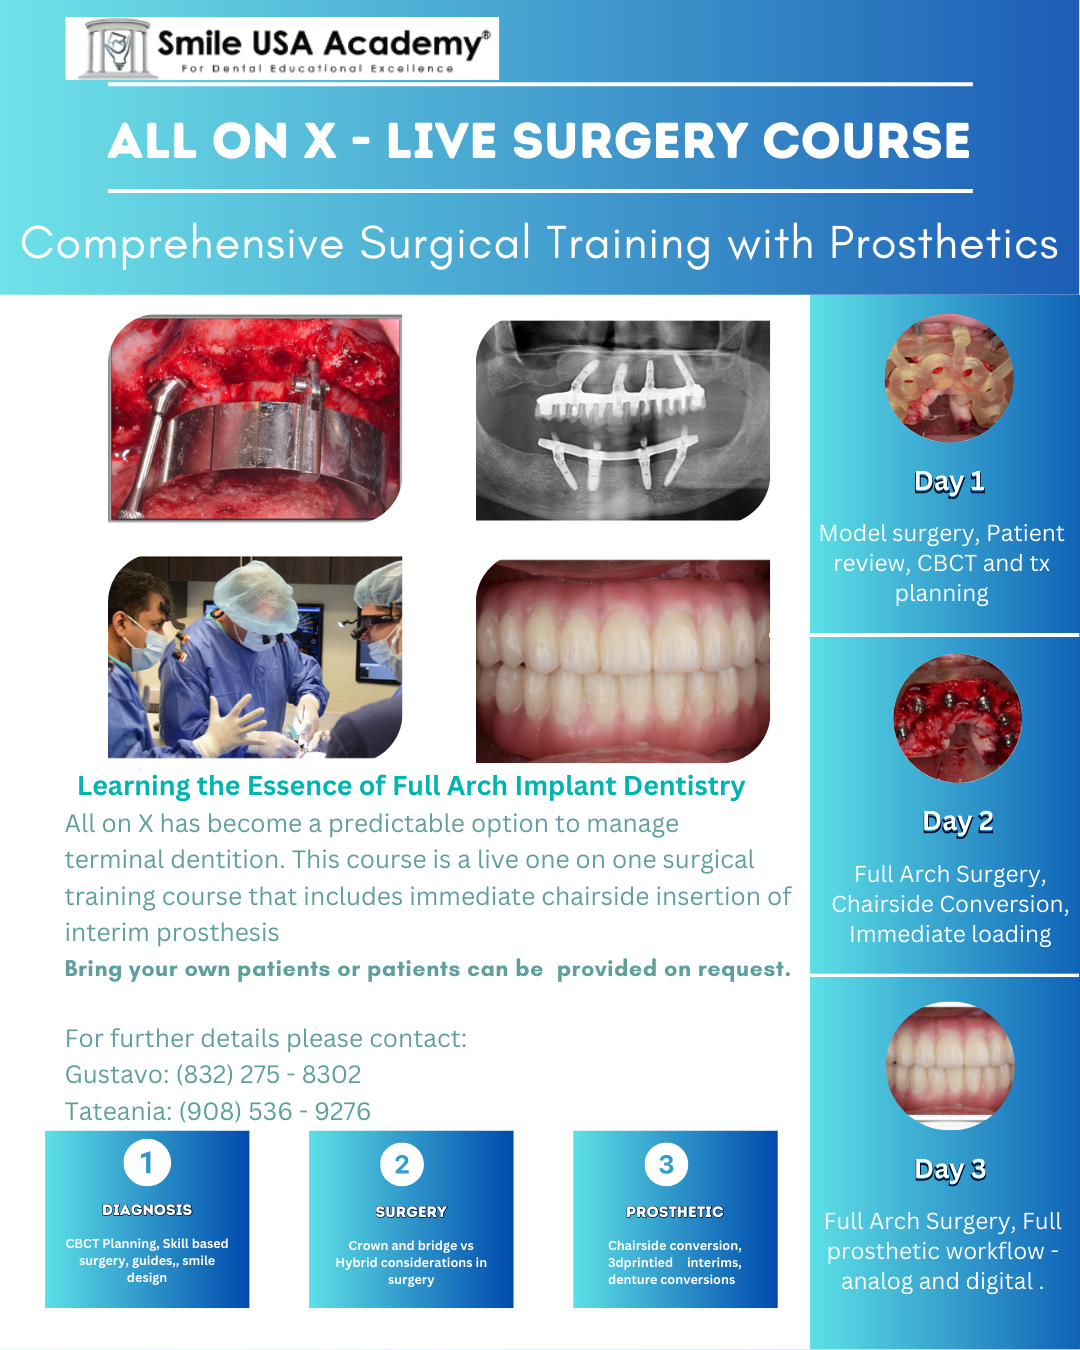 All On X Live Surgery Course: Comprehensive Surgical Training with Prosthetics - New Jersey